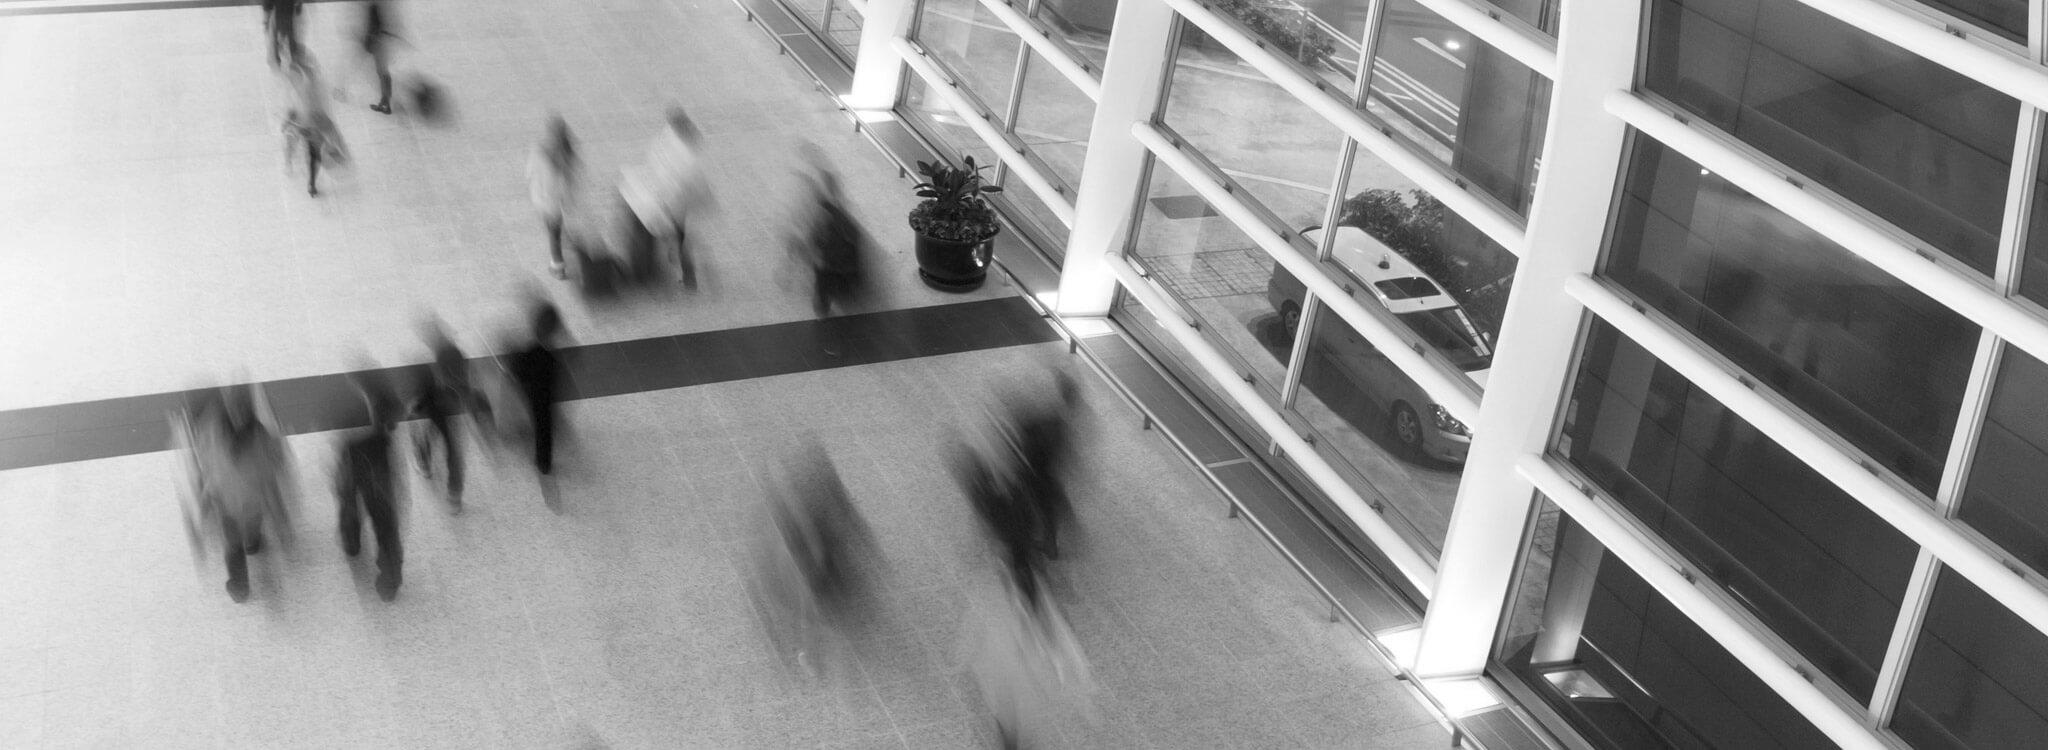 A black and white photo of people walking in an airport